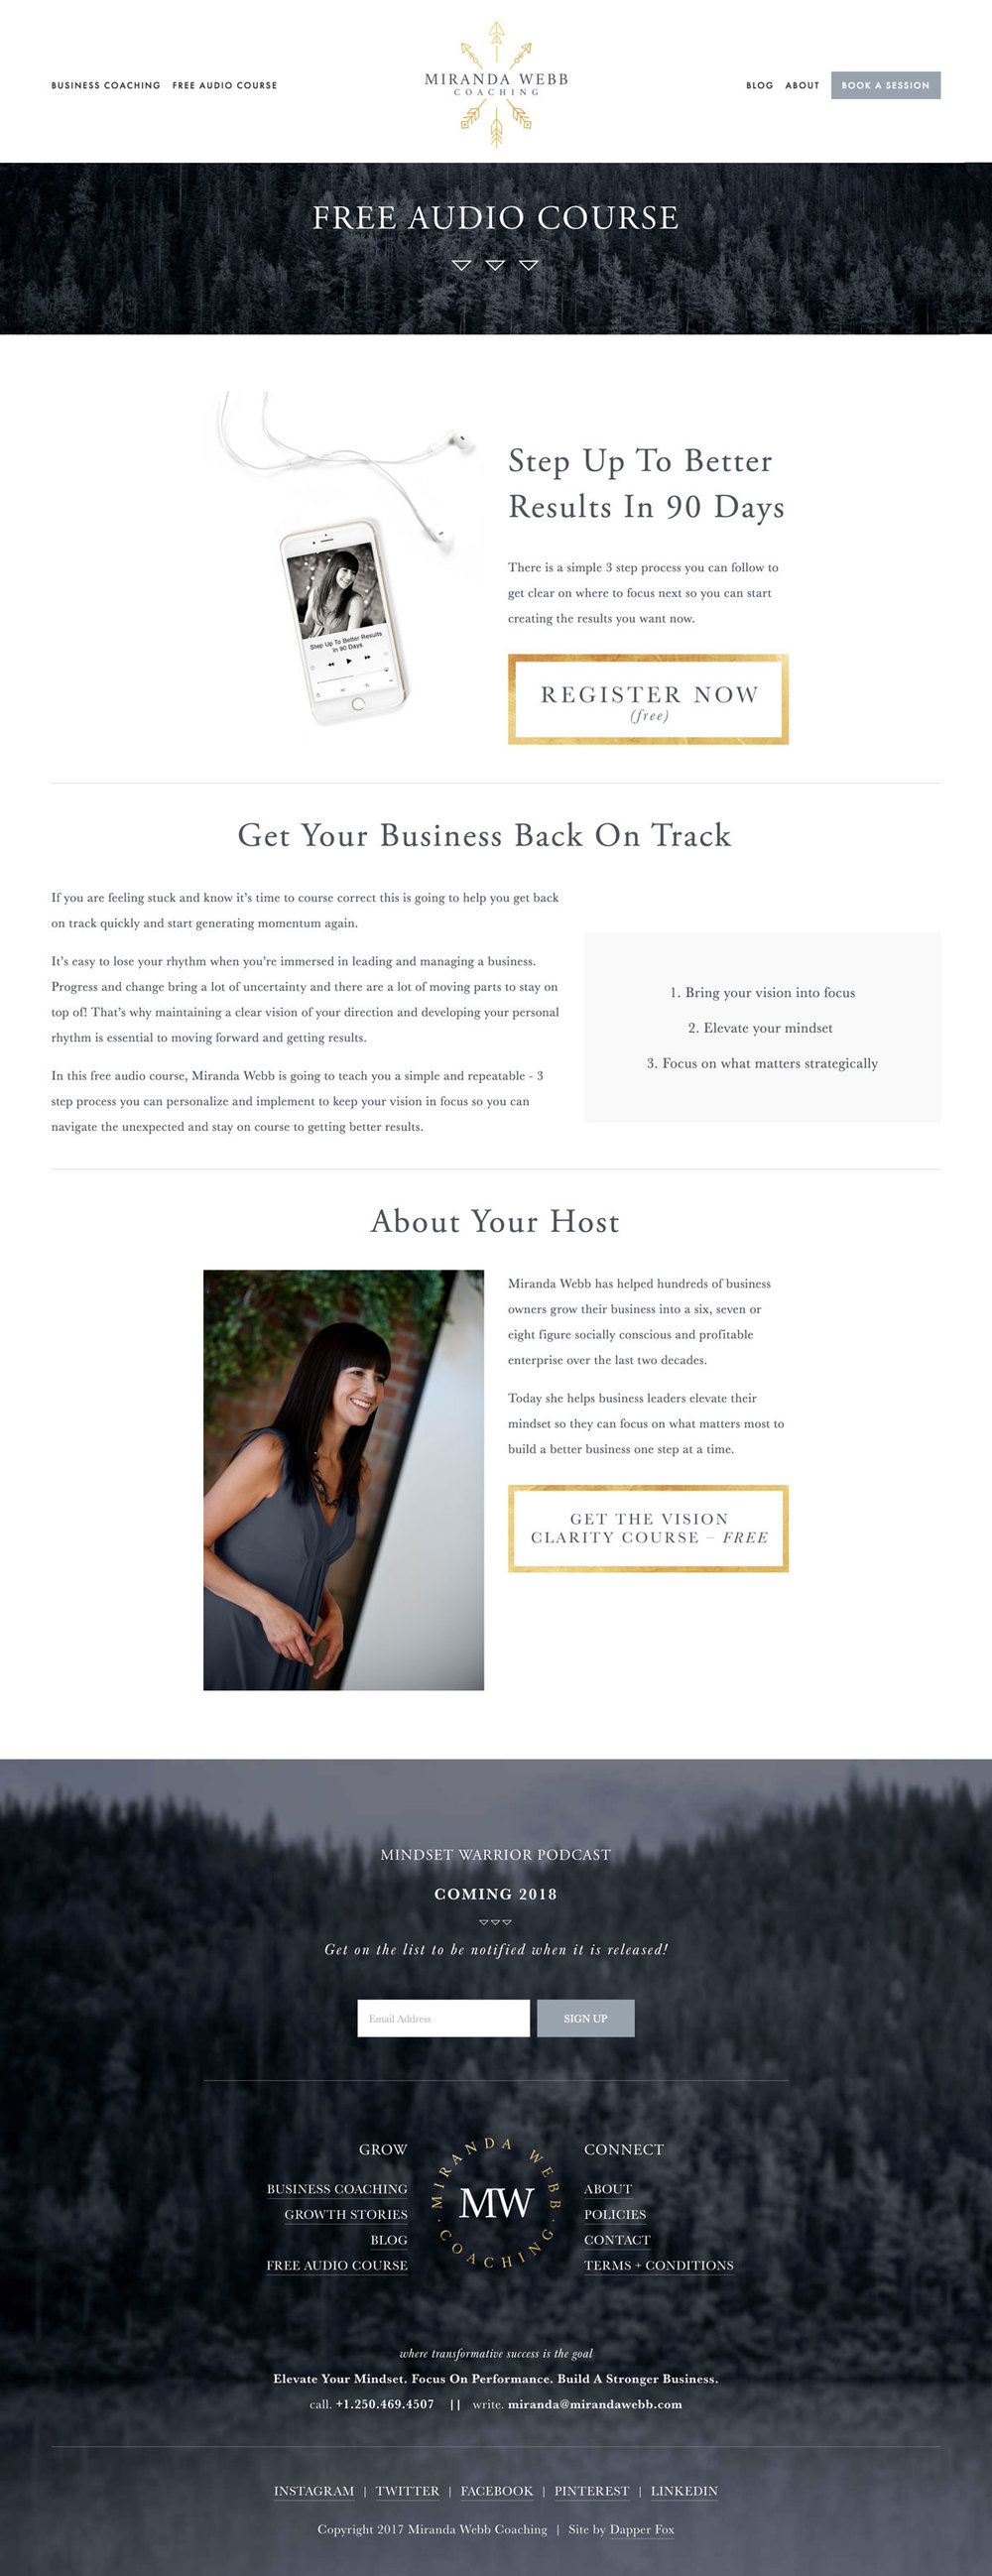 Audio Course on Squarespace Website for Business Coaches by Dapper Fox